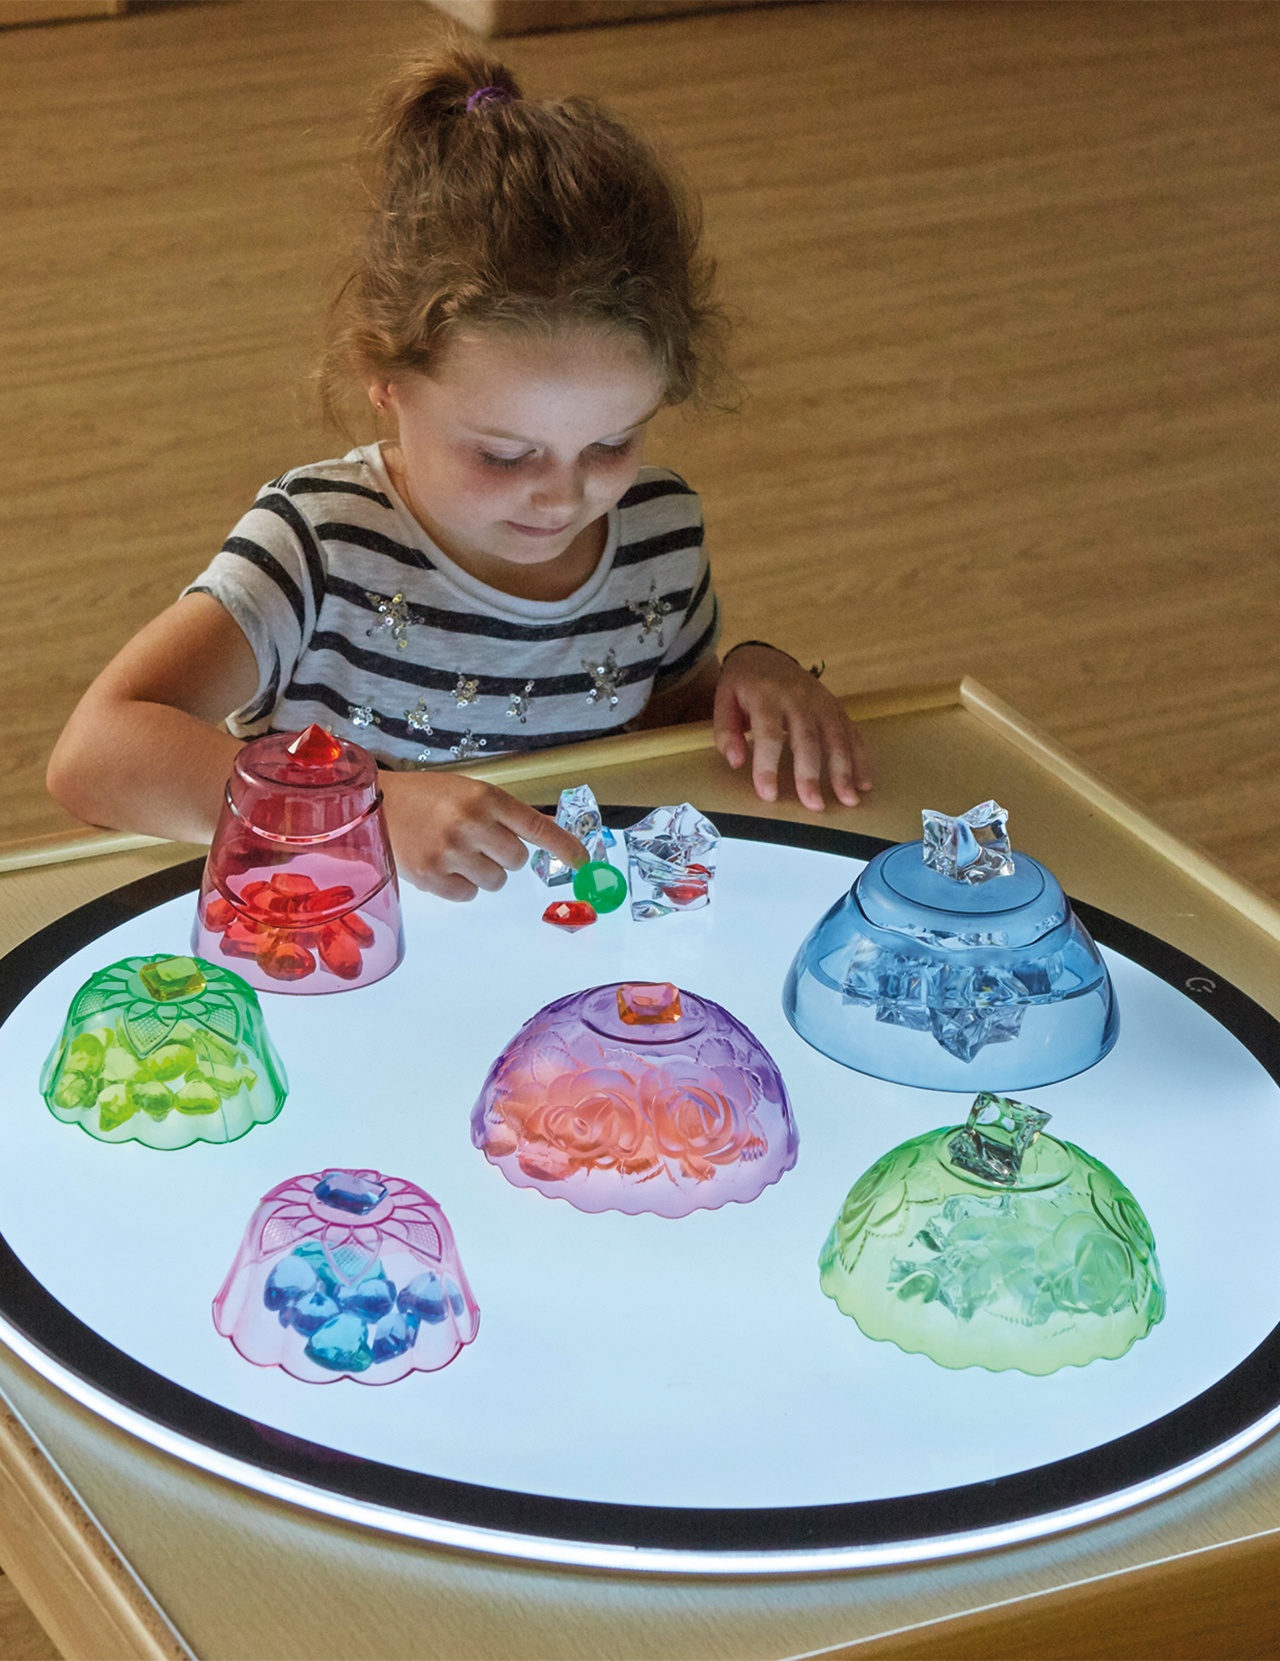 5 Ways to Foster Scientific Learning in Your Early Learning Classrooms